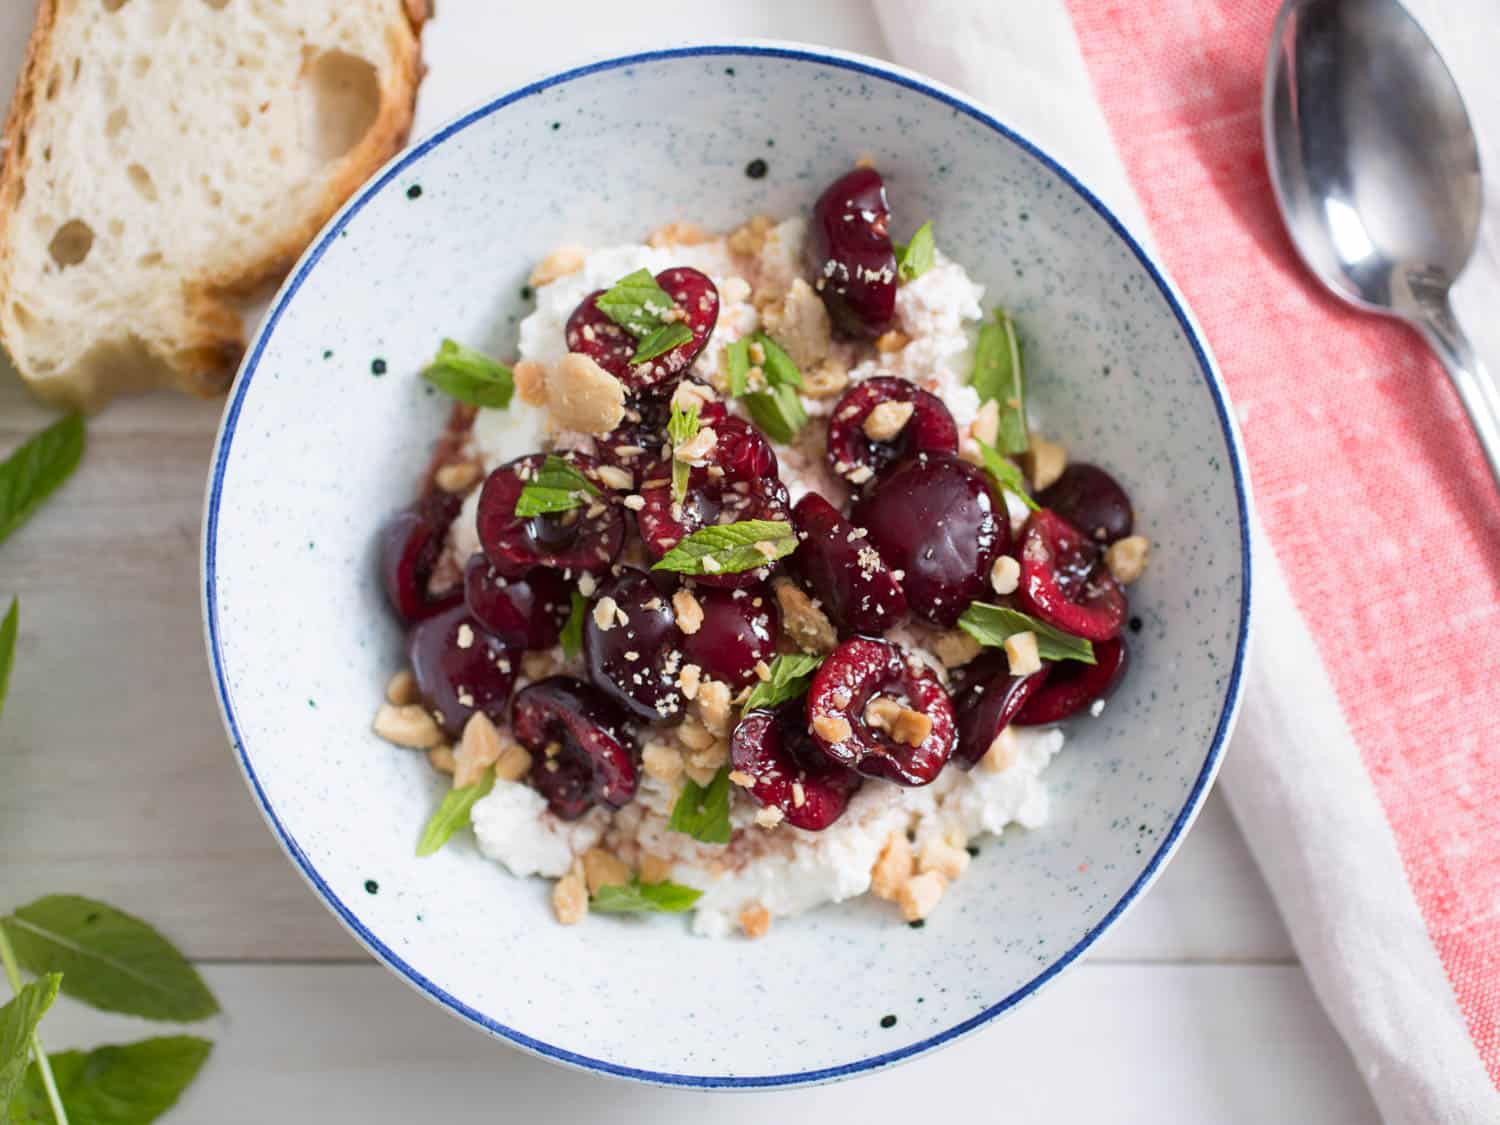 Sweet and sour cherry ricotta